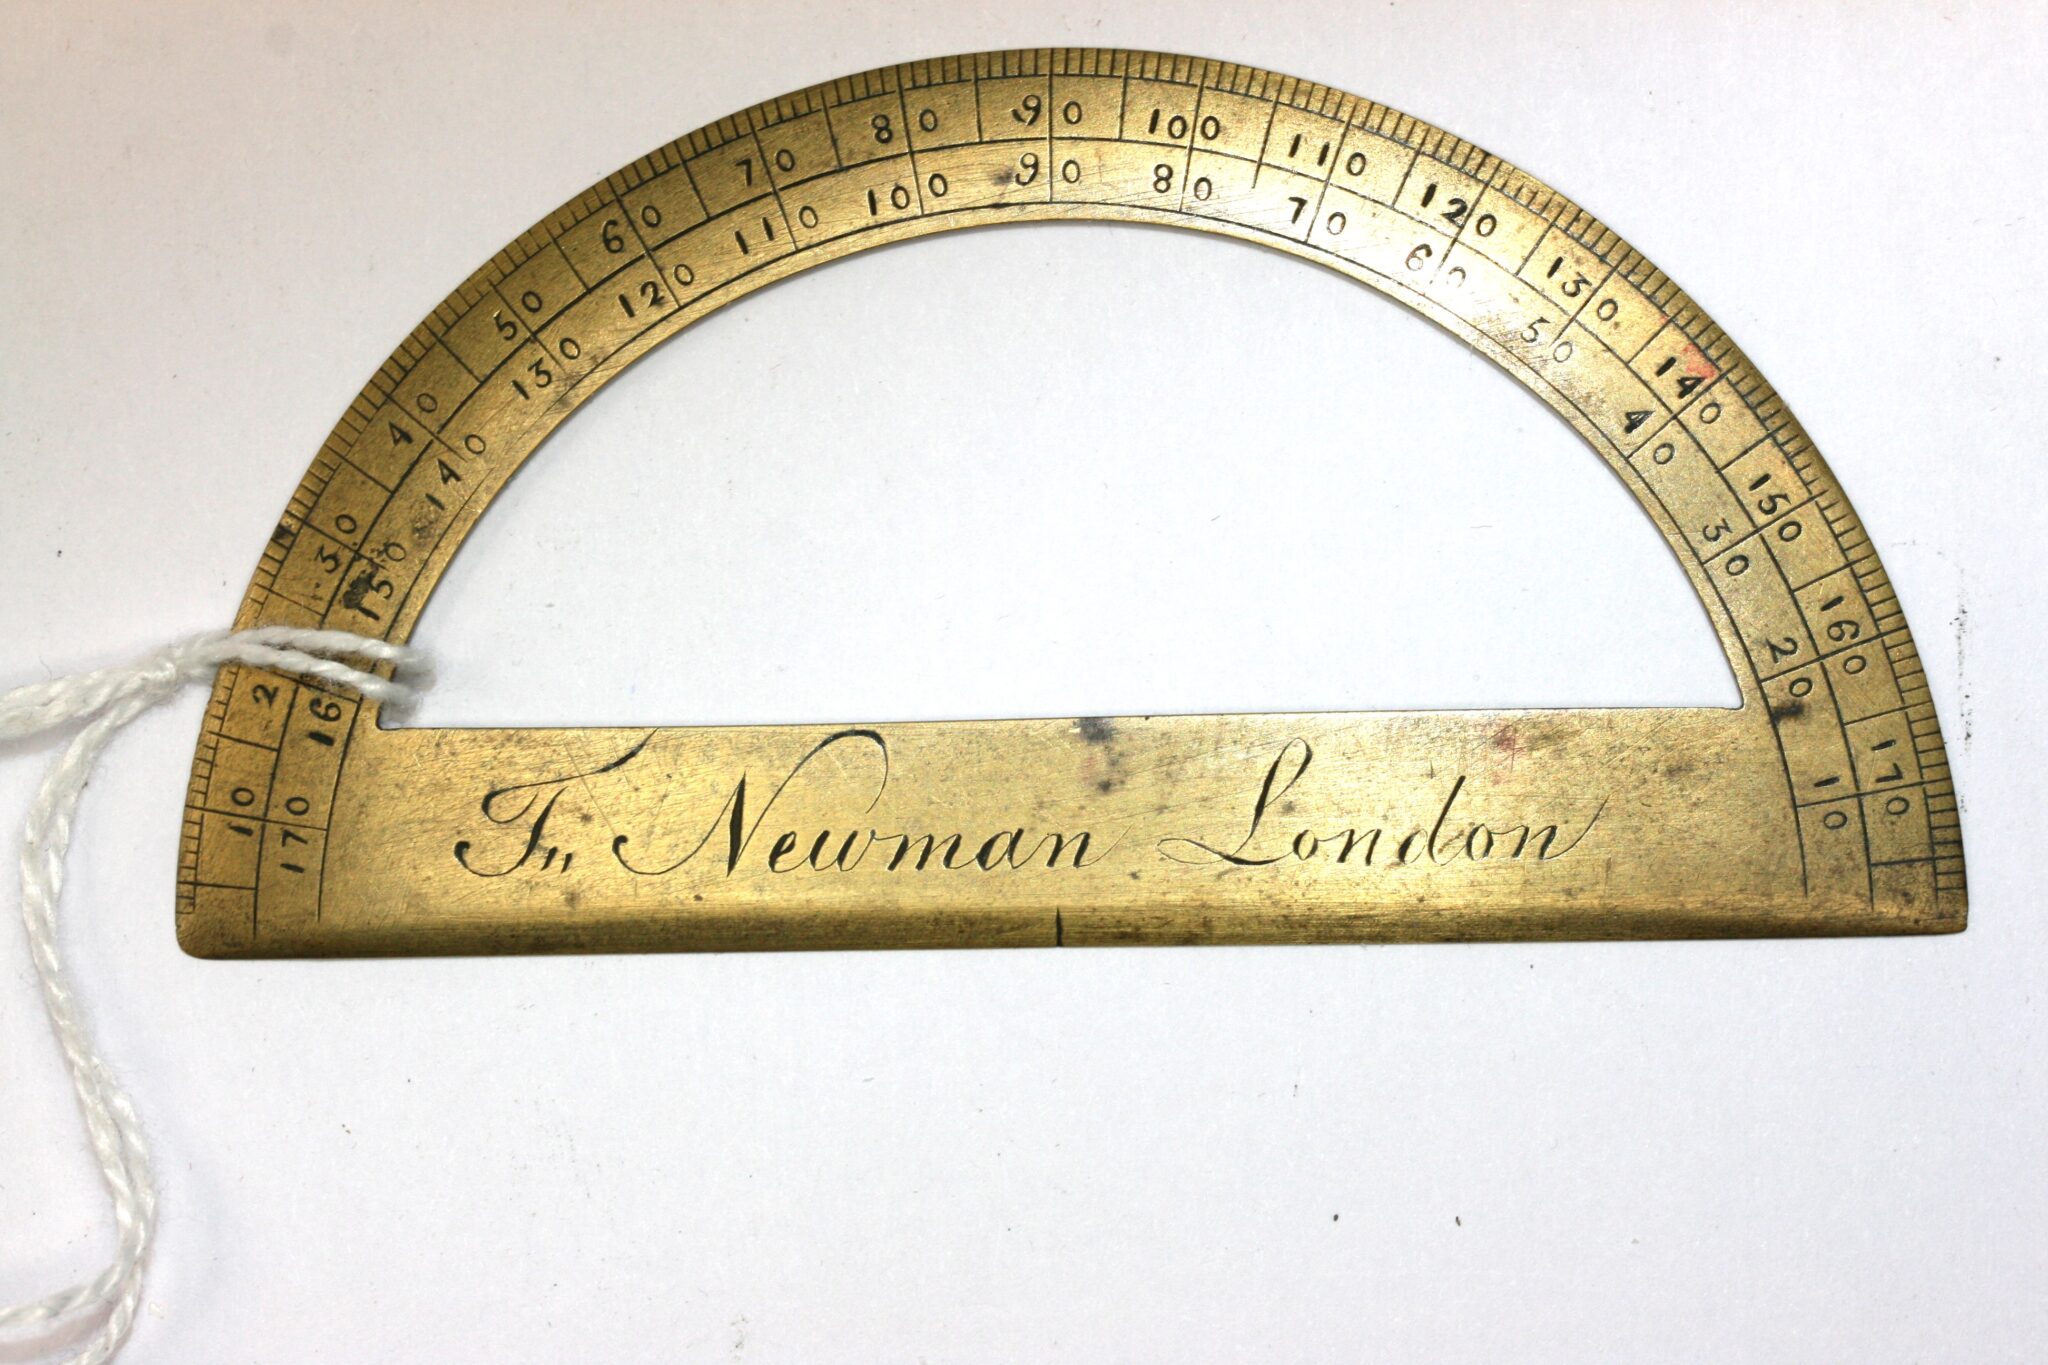 SMALL BRASS PROTRACTOR by JOHN FREDERICK NEWMAN (1782-1860 )  DIAM; 3.25 IN. ( 84 mm ), GOOD COND.